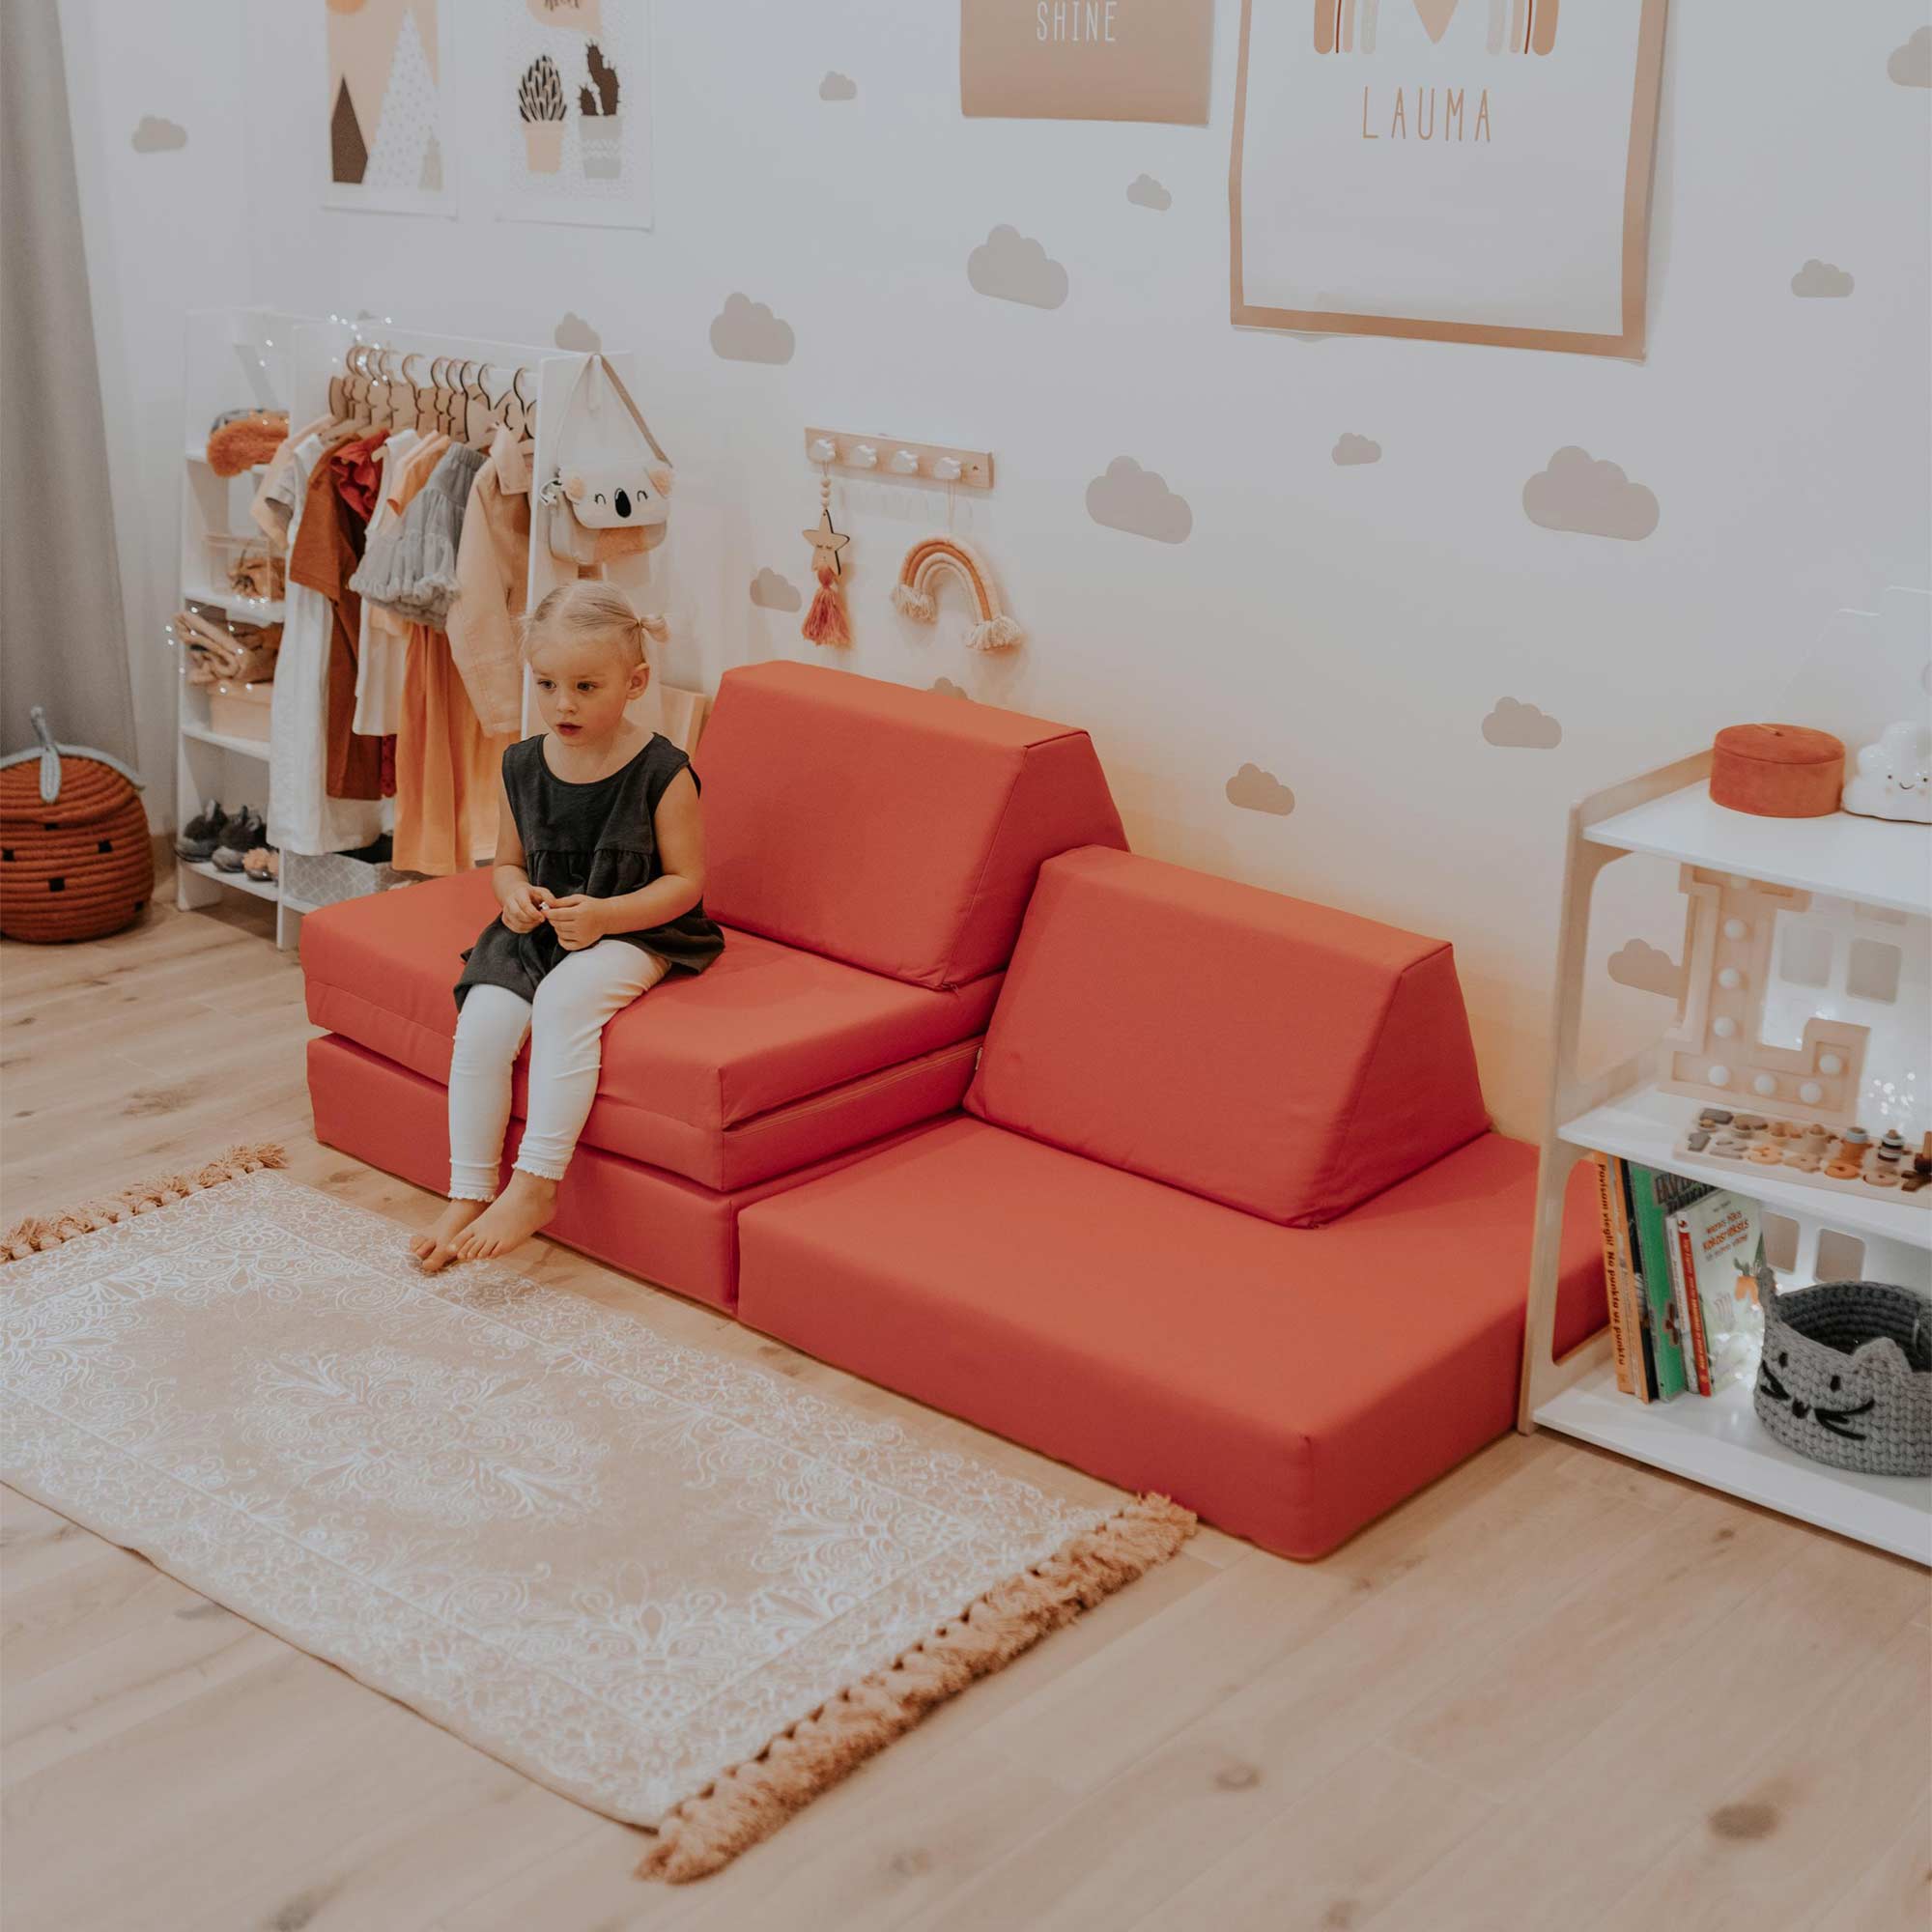 Toddler girl sitting on a coral Monboxy play sofa in her room